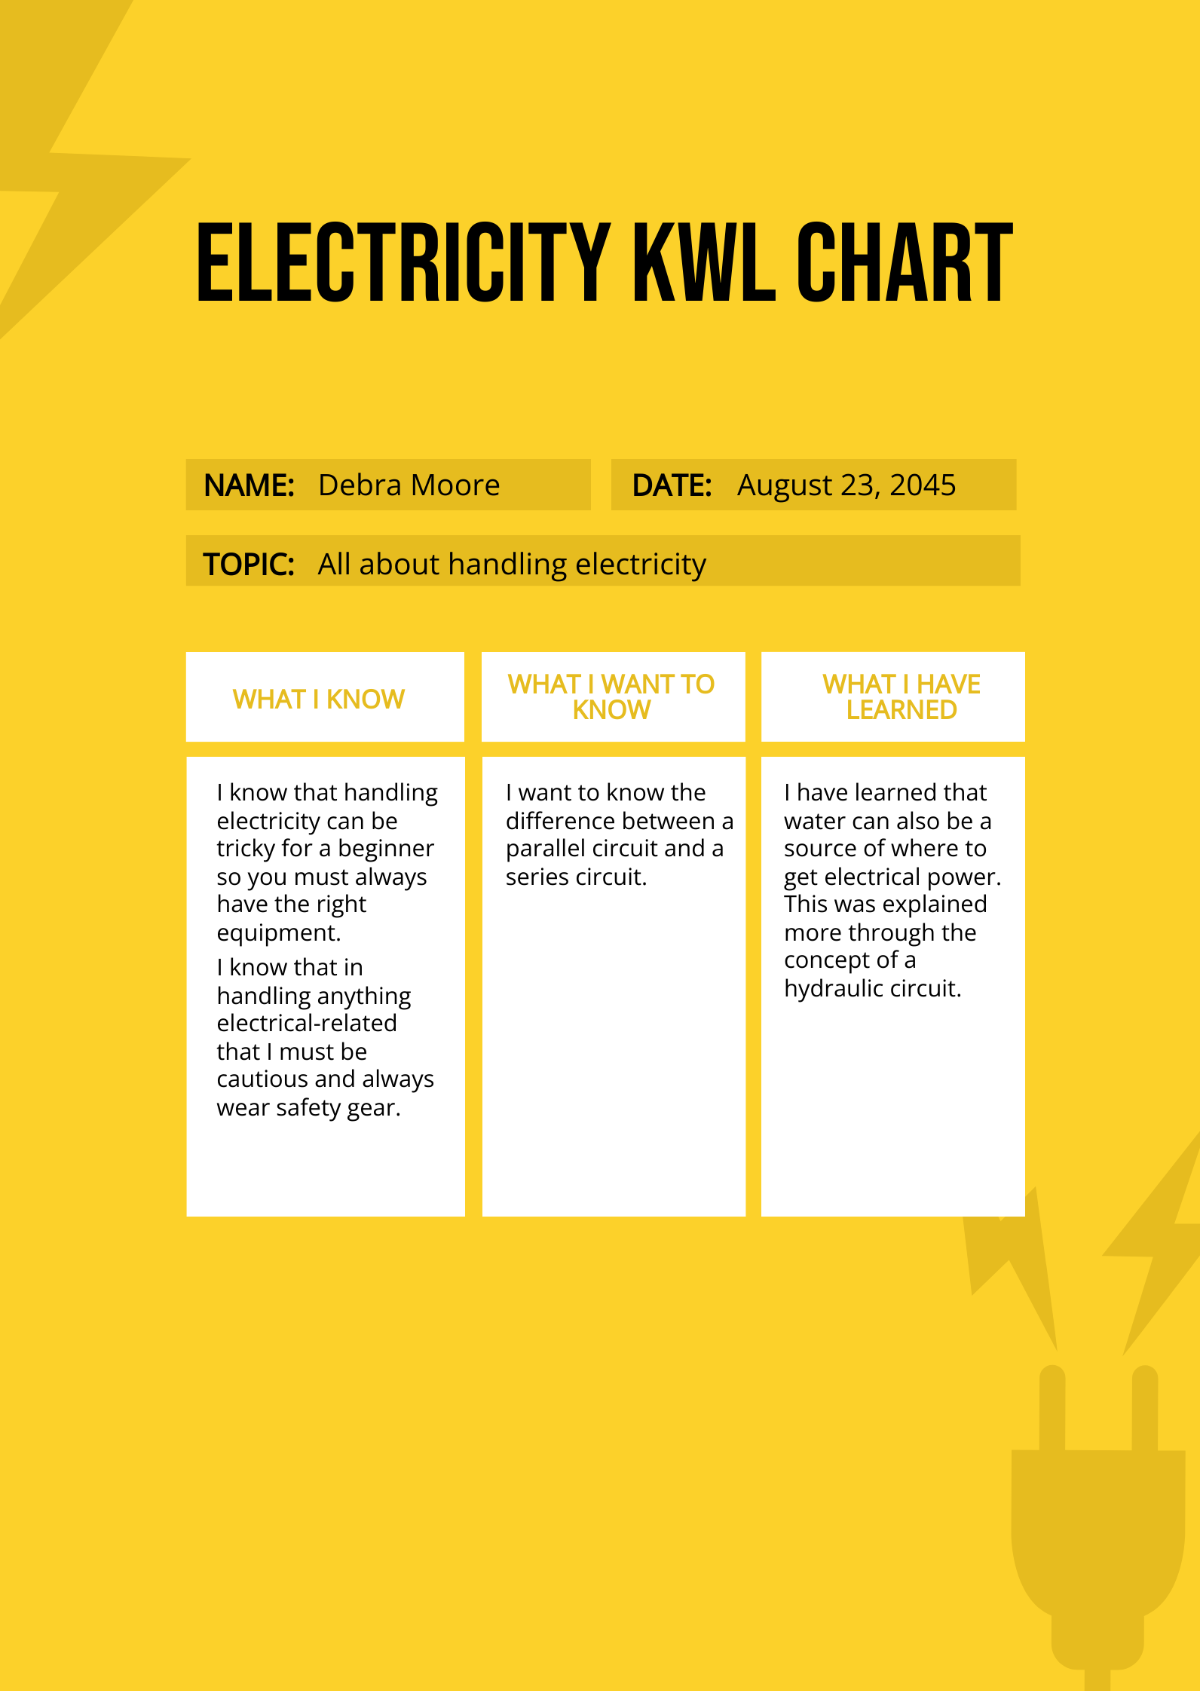 Electricity KWL Chart